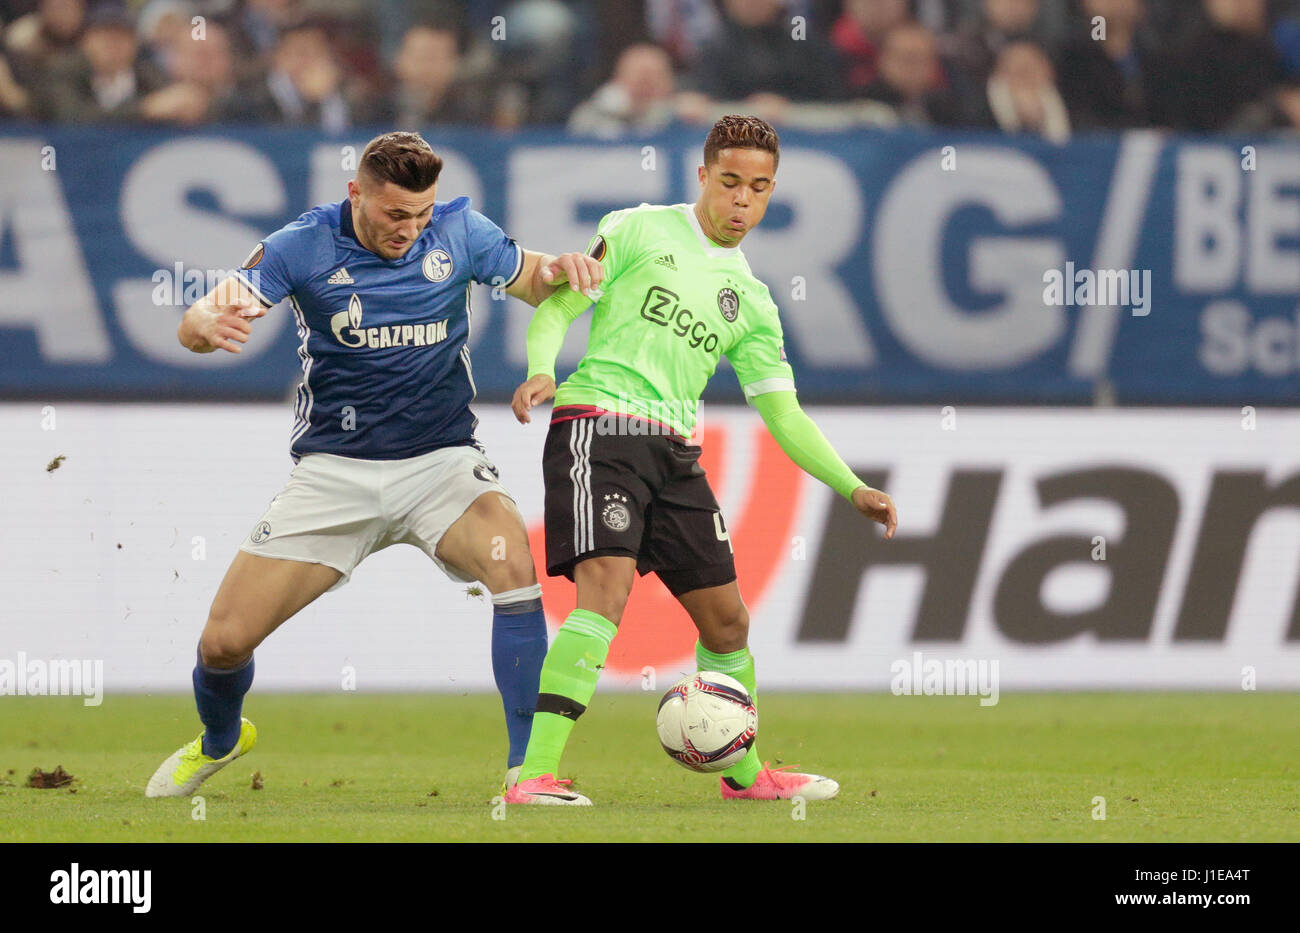 Gelsenkirchen, Germany. 20th Apr, 2017. Schalke's Sead Kolasinac vand Ajax's Justin Kluivert (r) vie for the ball during the second leg of the UEFA Europa League quarter final tie between FC Schalke 04 and AFC Ajax in the Veltins Arena in Gelsenkirchen, Germany, 20 April 2017. The game finished 3:2 and 3:4 on aggregate. Photo: Ina Fassbender/dpa/Alamy Live News Stock Photo